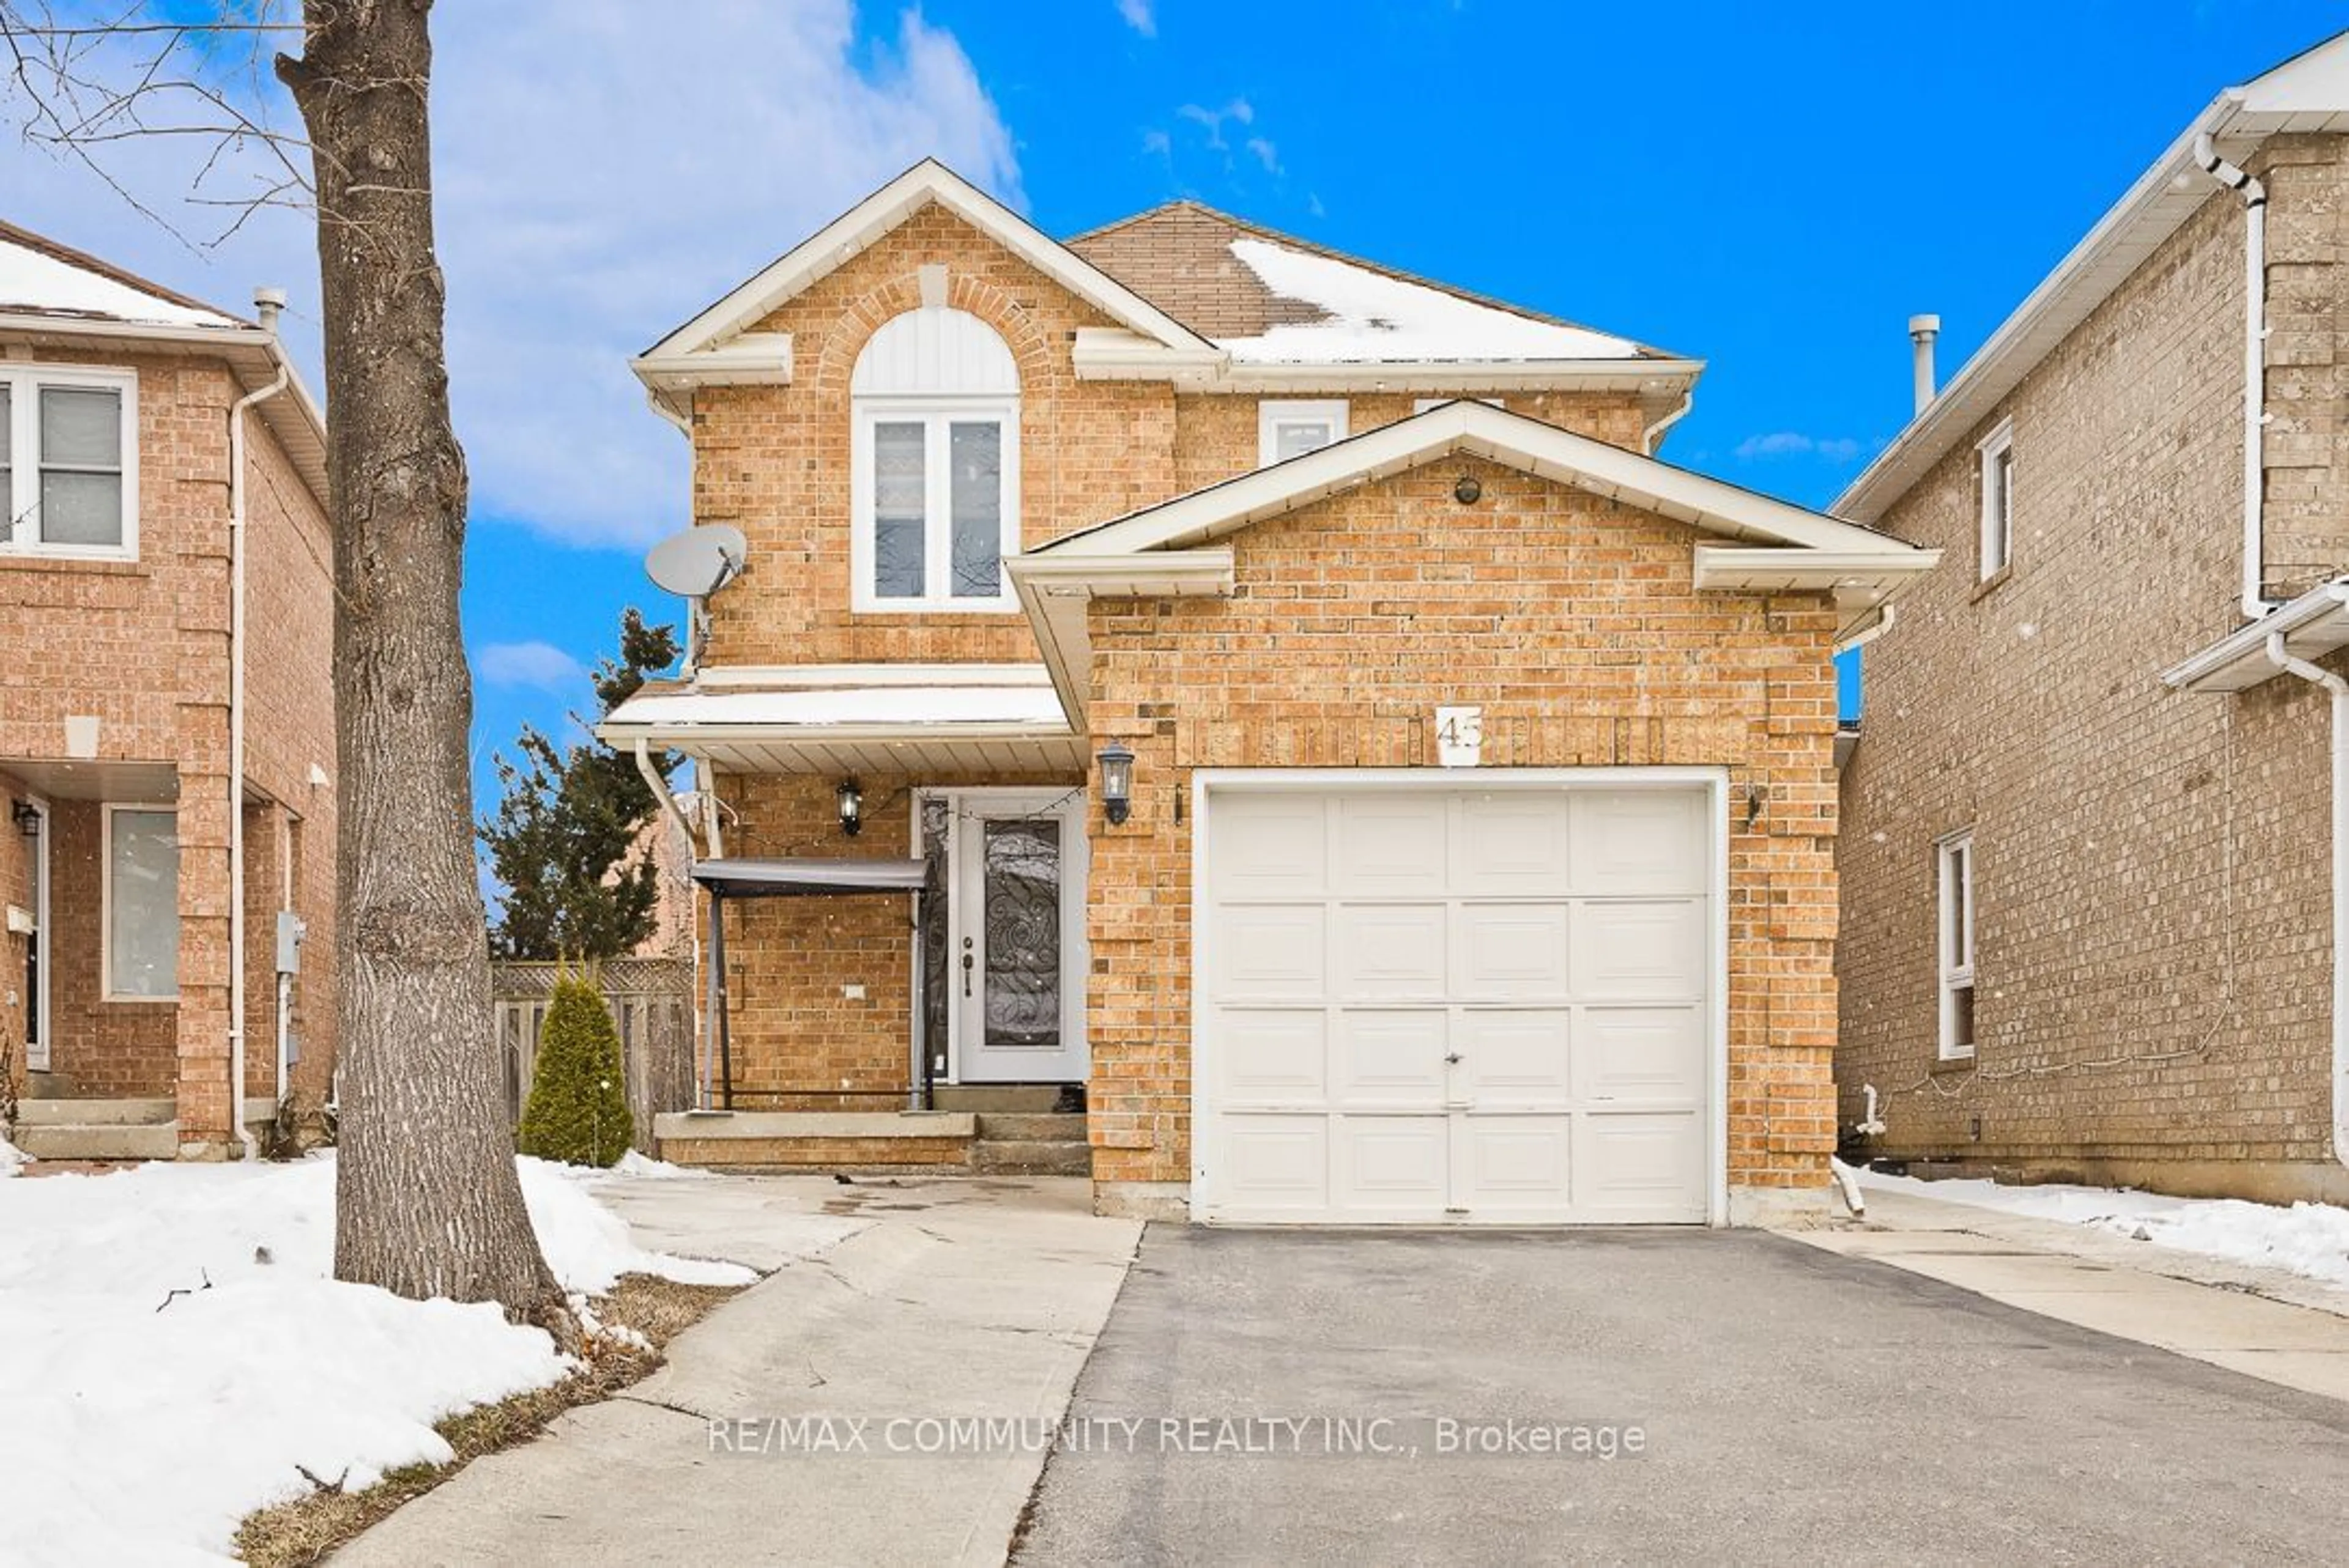 Frontside or backside of a home for 45 Letty Ave, Brampton Ontario L6Y 4T1